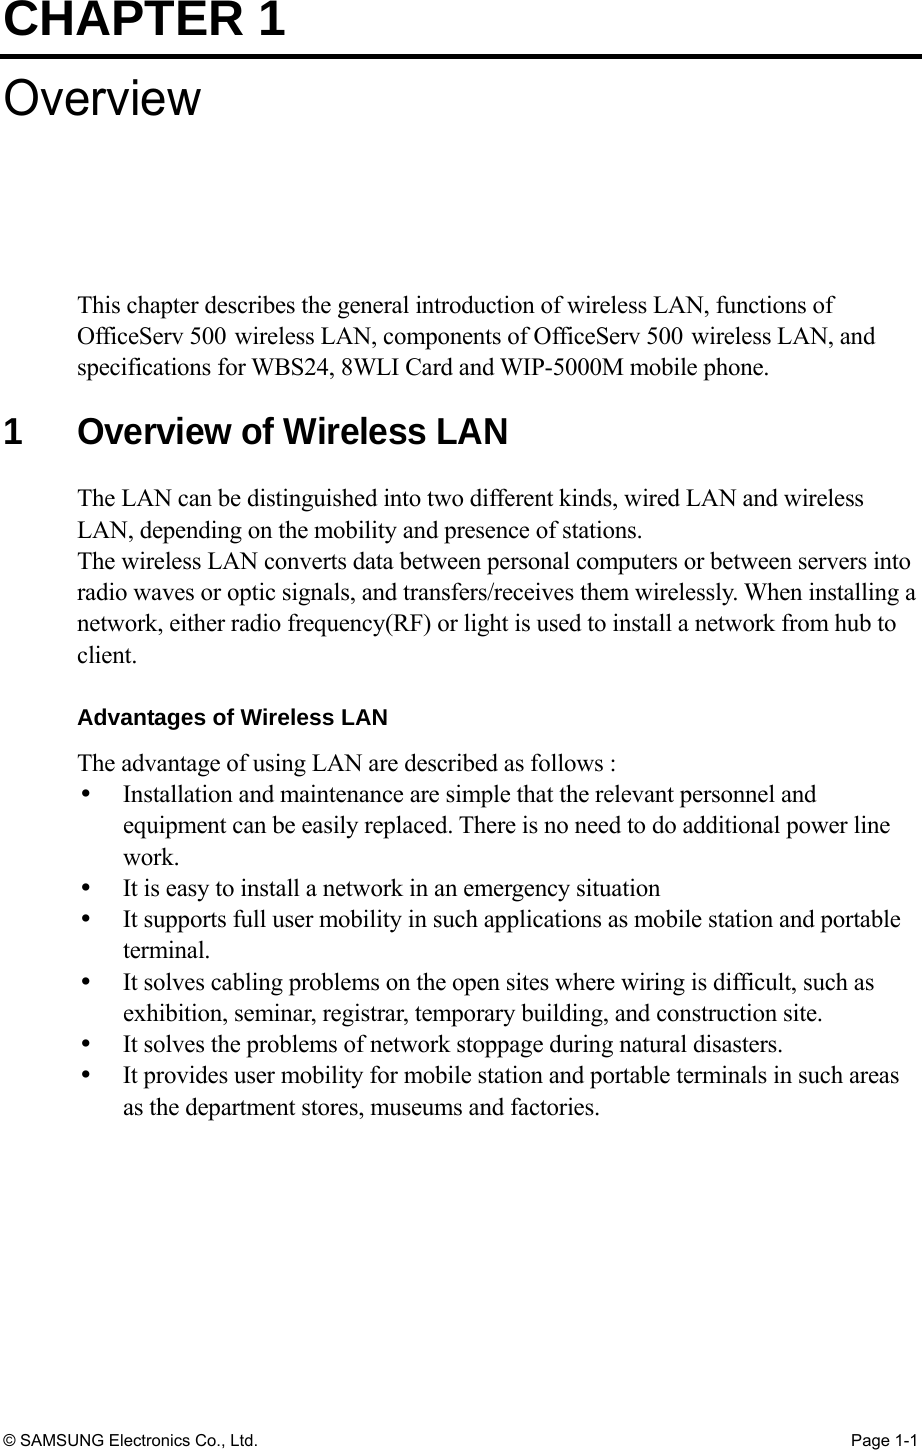 CHAPTER 1 © SAMSUNG Electronics Co., Ltd.  Page 1-1 Overview This chapter describes the general introduction of wireless LAN, functions of OfficeServ 500 wireless LAN, components of OfficeServ 500 wireless LAN, and specifications for WBS24, 8WLI Card and WIP-5000M mobile phone.  1  Overview of Wireless LAN The LAN can be distinguished into two different kinds, wired LAN and wireless LAN, depending on the mobility and presence of stations. The wireless LAN converts data between personal computers or between servers into radio waves or optic signals, and transfers/receives them wirelessly. When installing a network, either radio frequency(RF) or light is used to install a network from hub to client.  Advantages of Wireless LAN The advantage of using LAN are described as follows :   Installation and maintenance are simple that the relevant personnel and equipment can be easily replaced. There is no need to do additional power line work.    It is easy to install a network in an emergency situation   It supports full user mobility in such applications as mobile station and portable terminal.    It solves cabling problems on the open sites where wiring is difficult, such as exhibition, seminar, registrar, temporary building, and construction site.   It solves the problems of network stoppage during natural disasters.   It provides user mobility for mobile station and portable terminals in such areas as the department stores, museums and factories. 